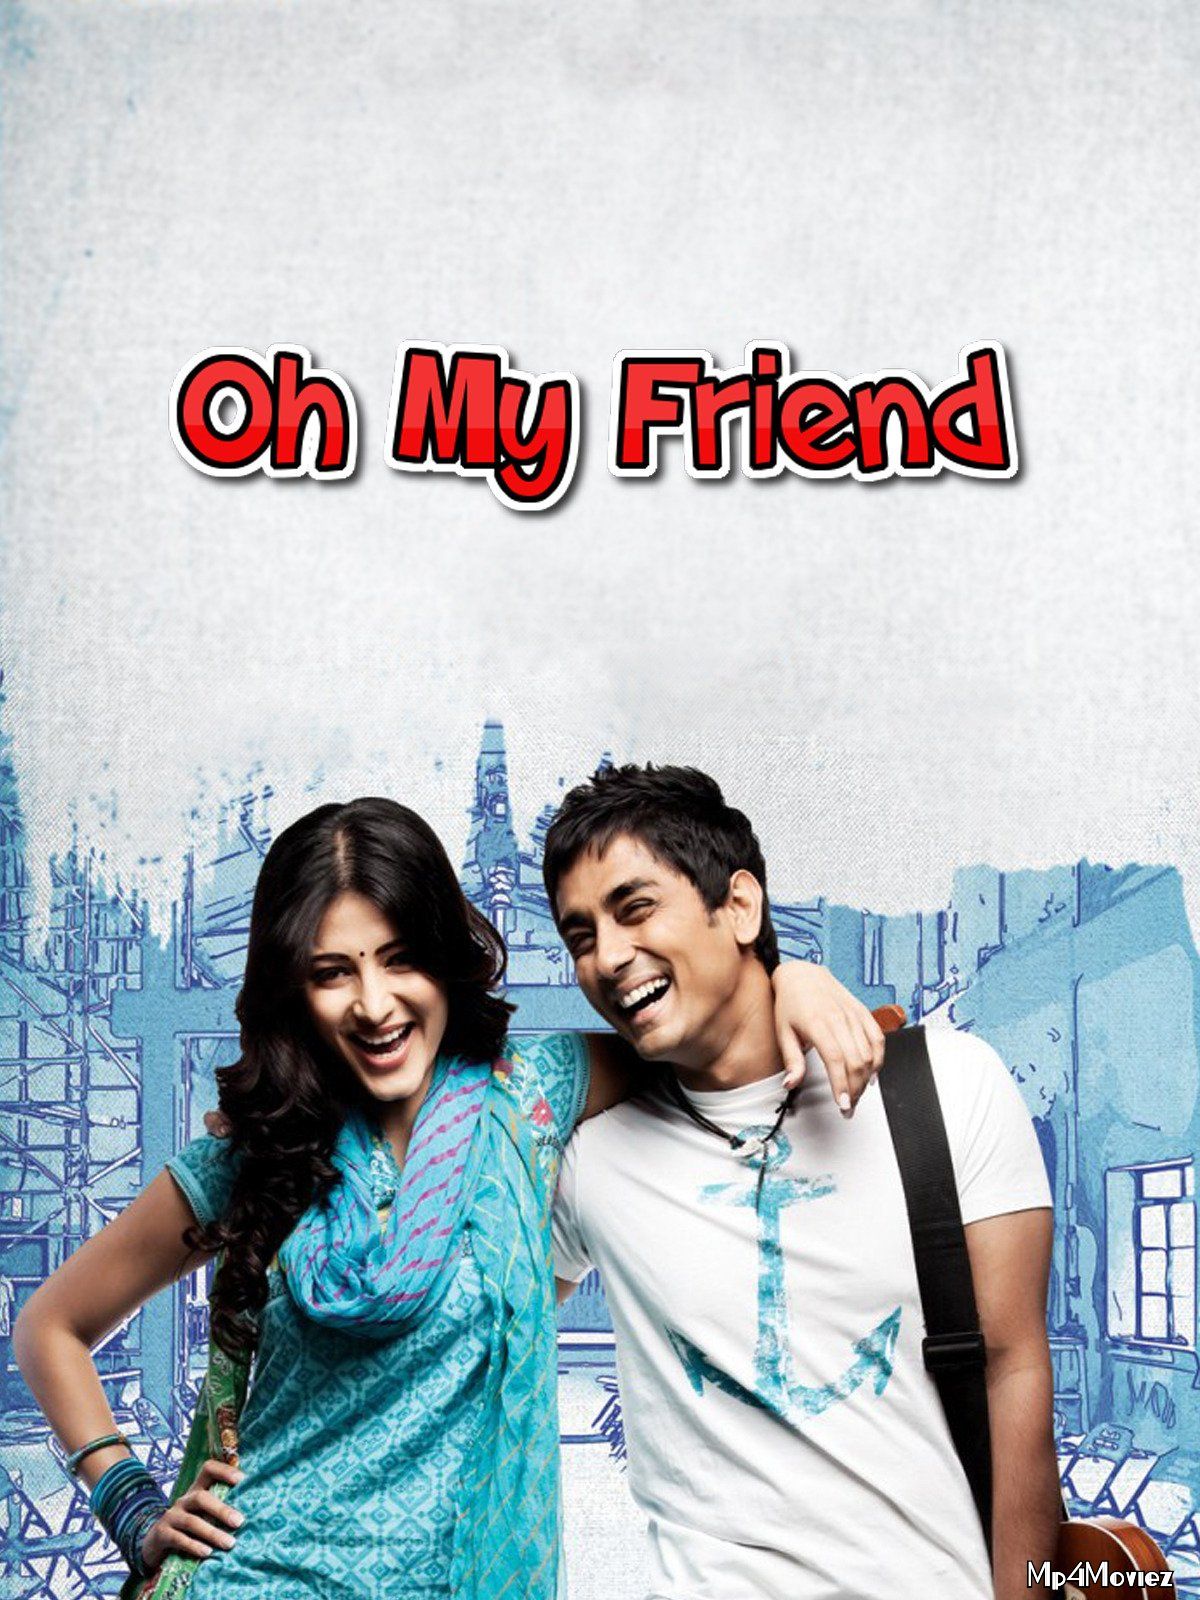 Oh My Friend (2020) Hindi Dubbed HDRip download full movie